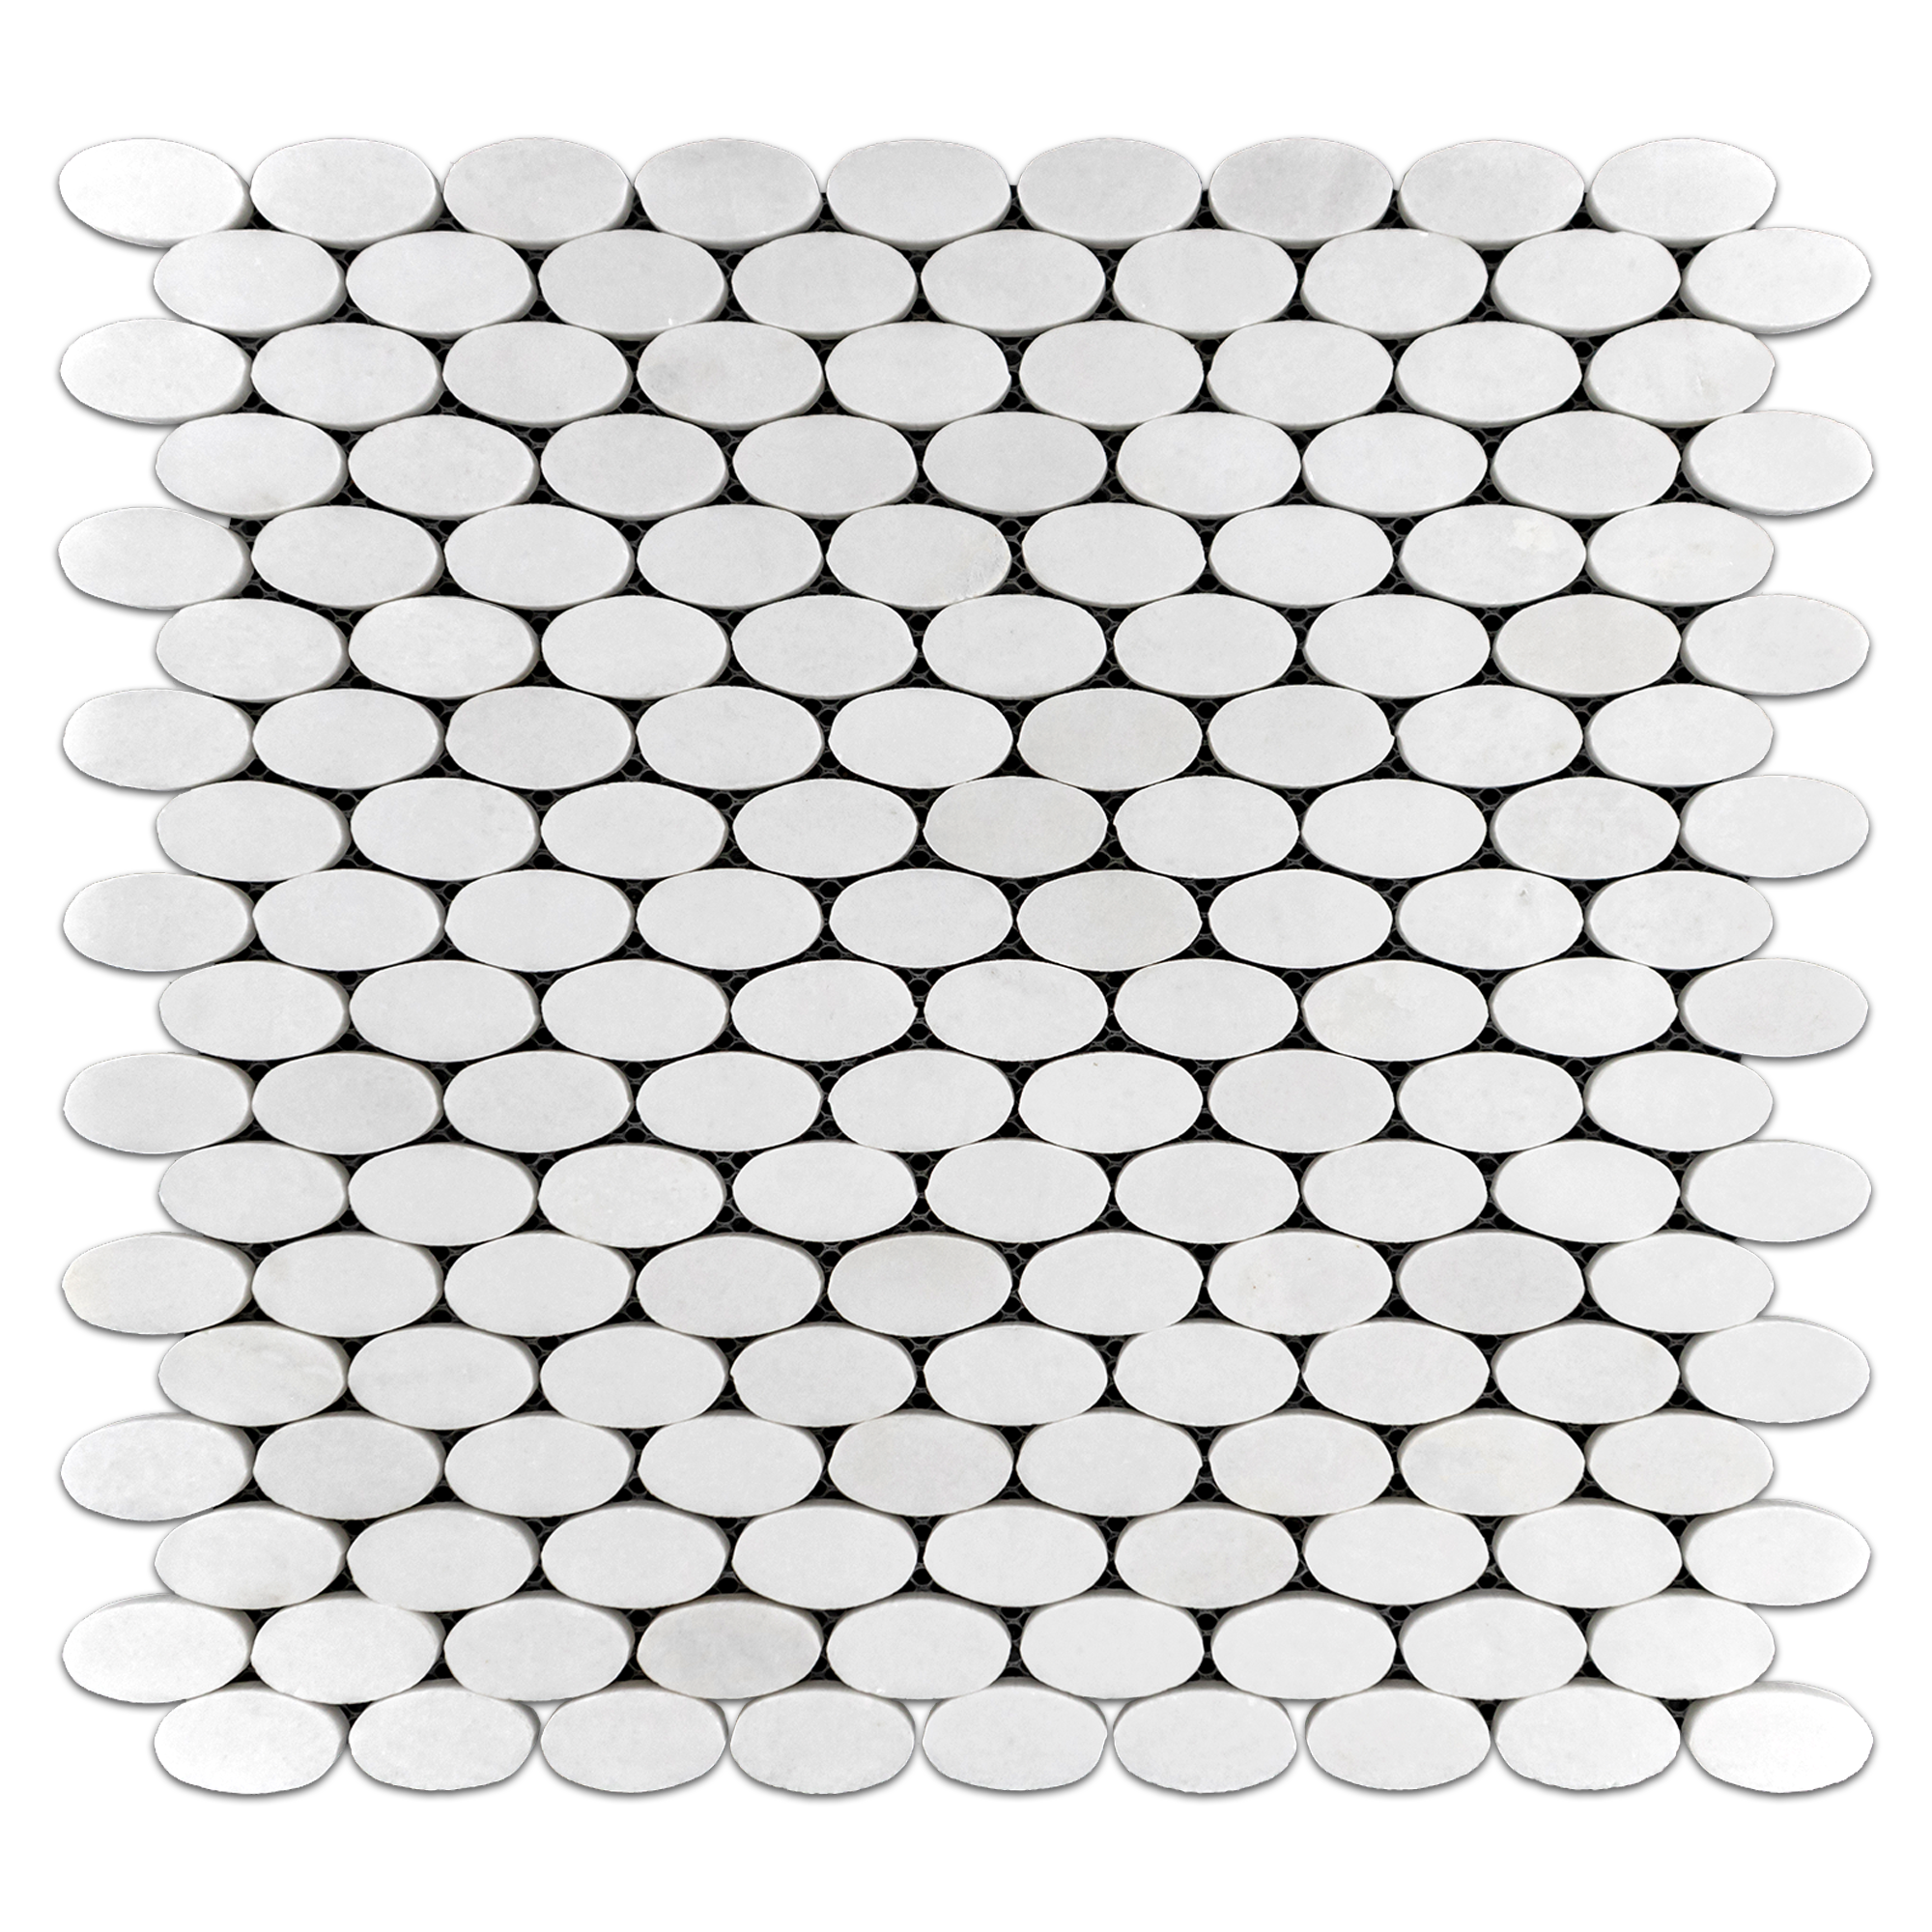 Elon White Thassos Marble Ovals Field Mosaic 11.8125x12x0.375 Polished SM1204P Surface Group International Product